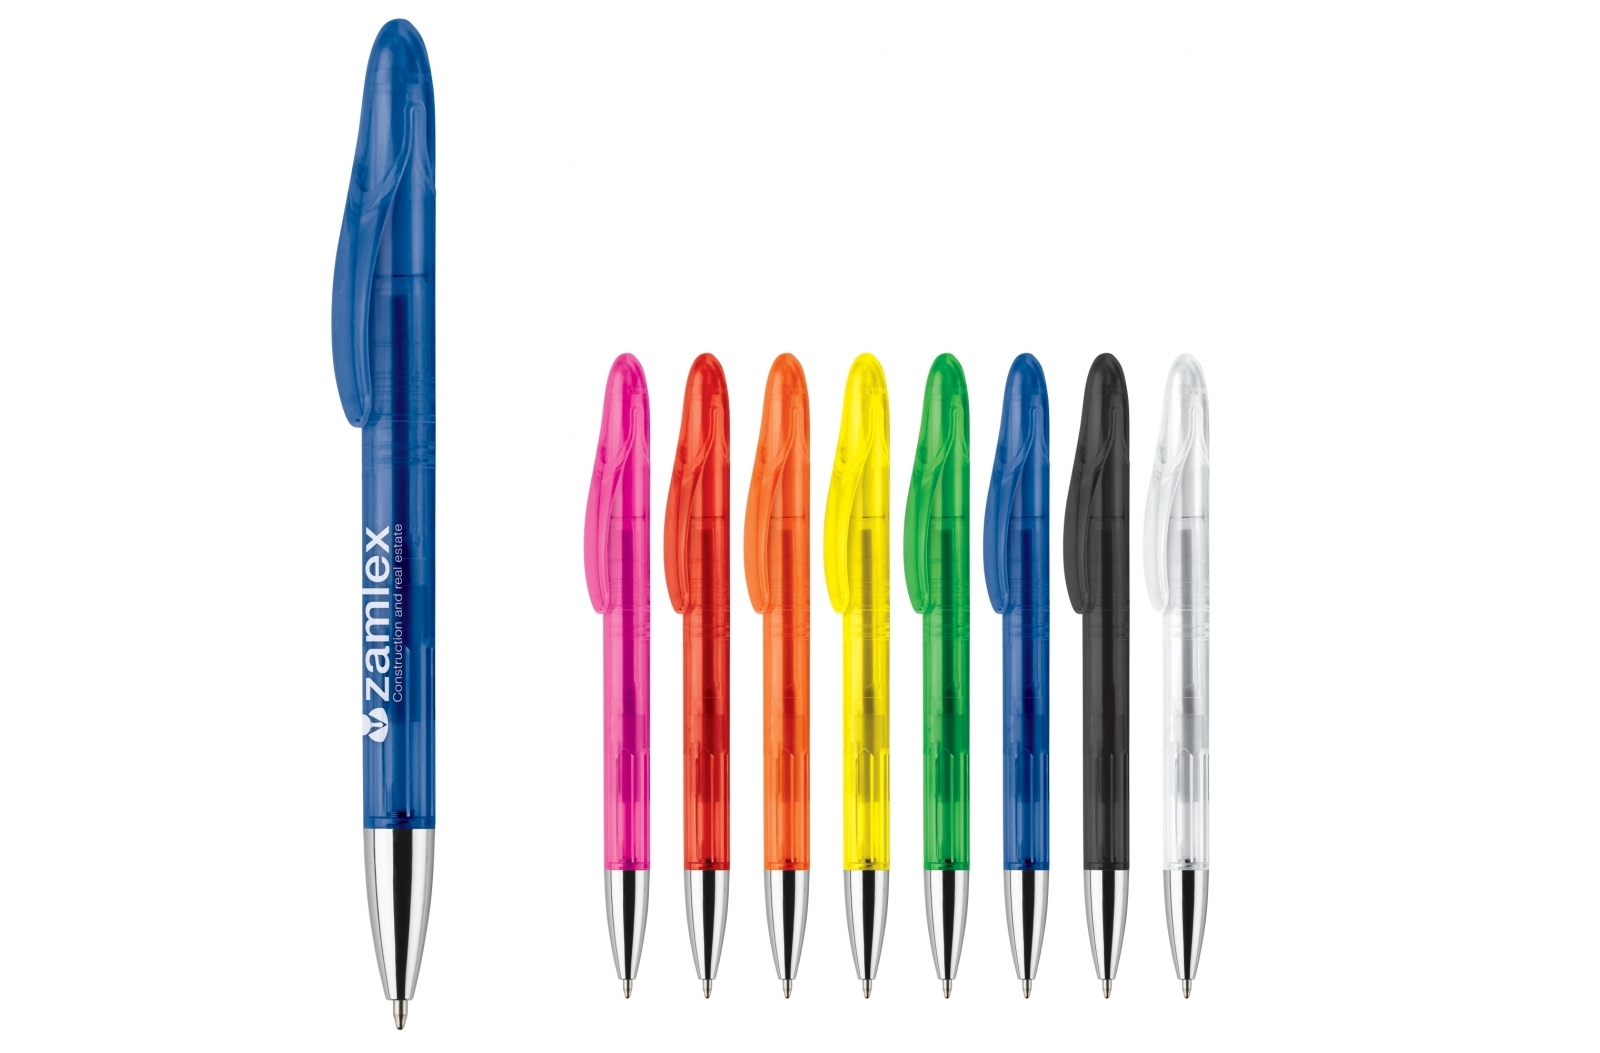 This is a clear, quick-drying ballpoint pen from the brand Little Marlow - Tarrant Rushton